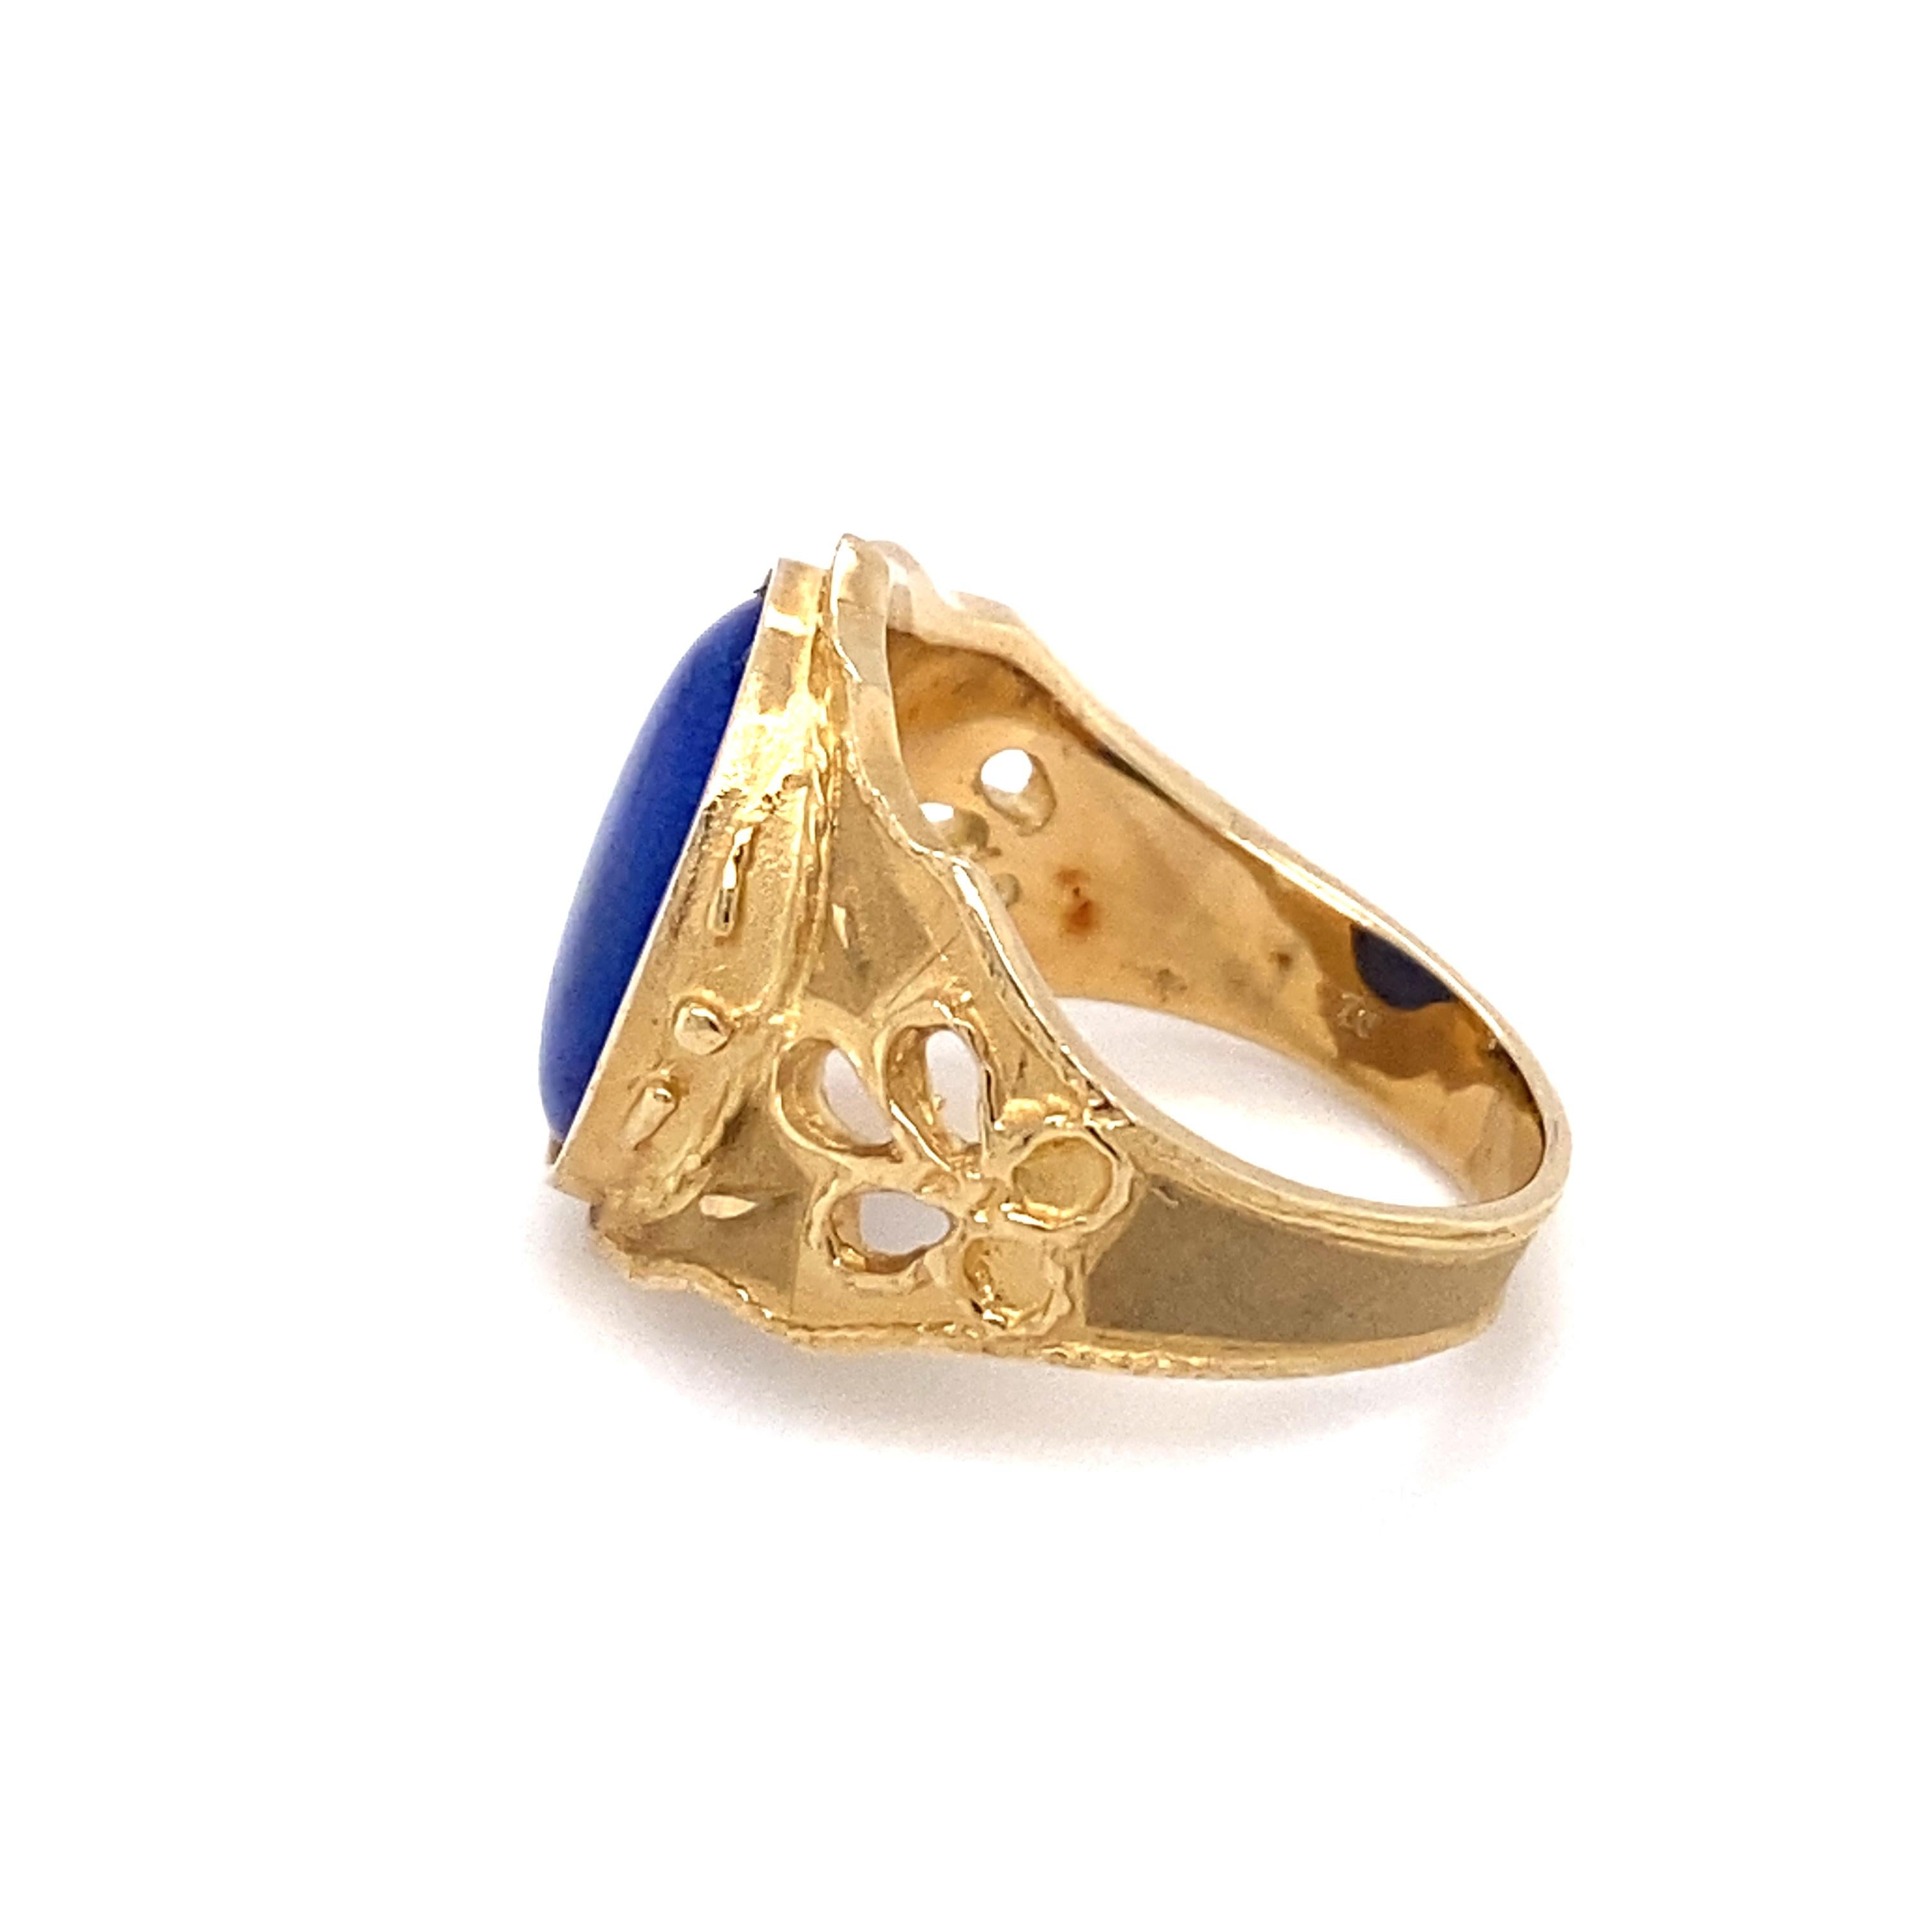 Art Deco circa 1960s Oval Lapis Lazuli Ring with Carved Floral Motif in 14K Gold